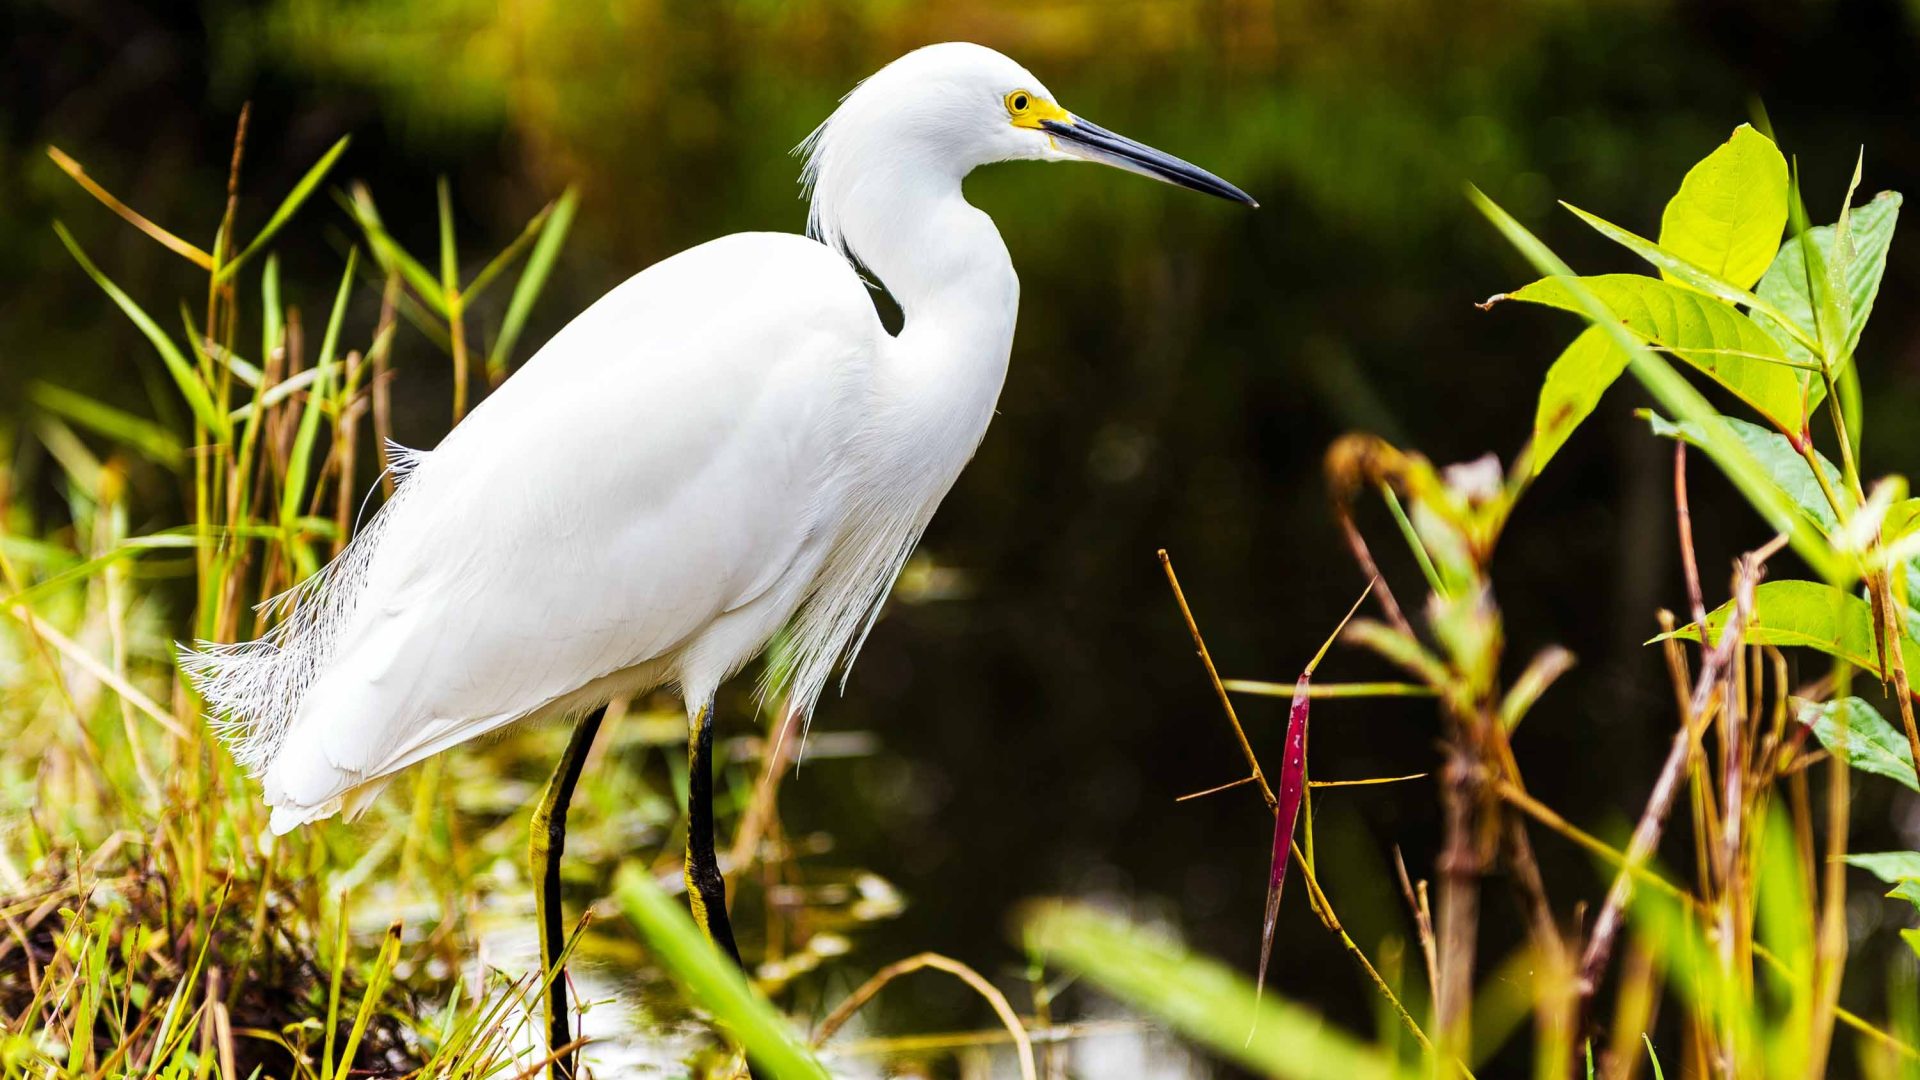 A white egret sits by some water.